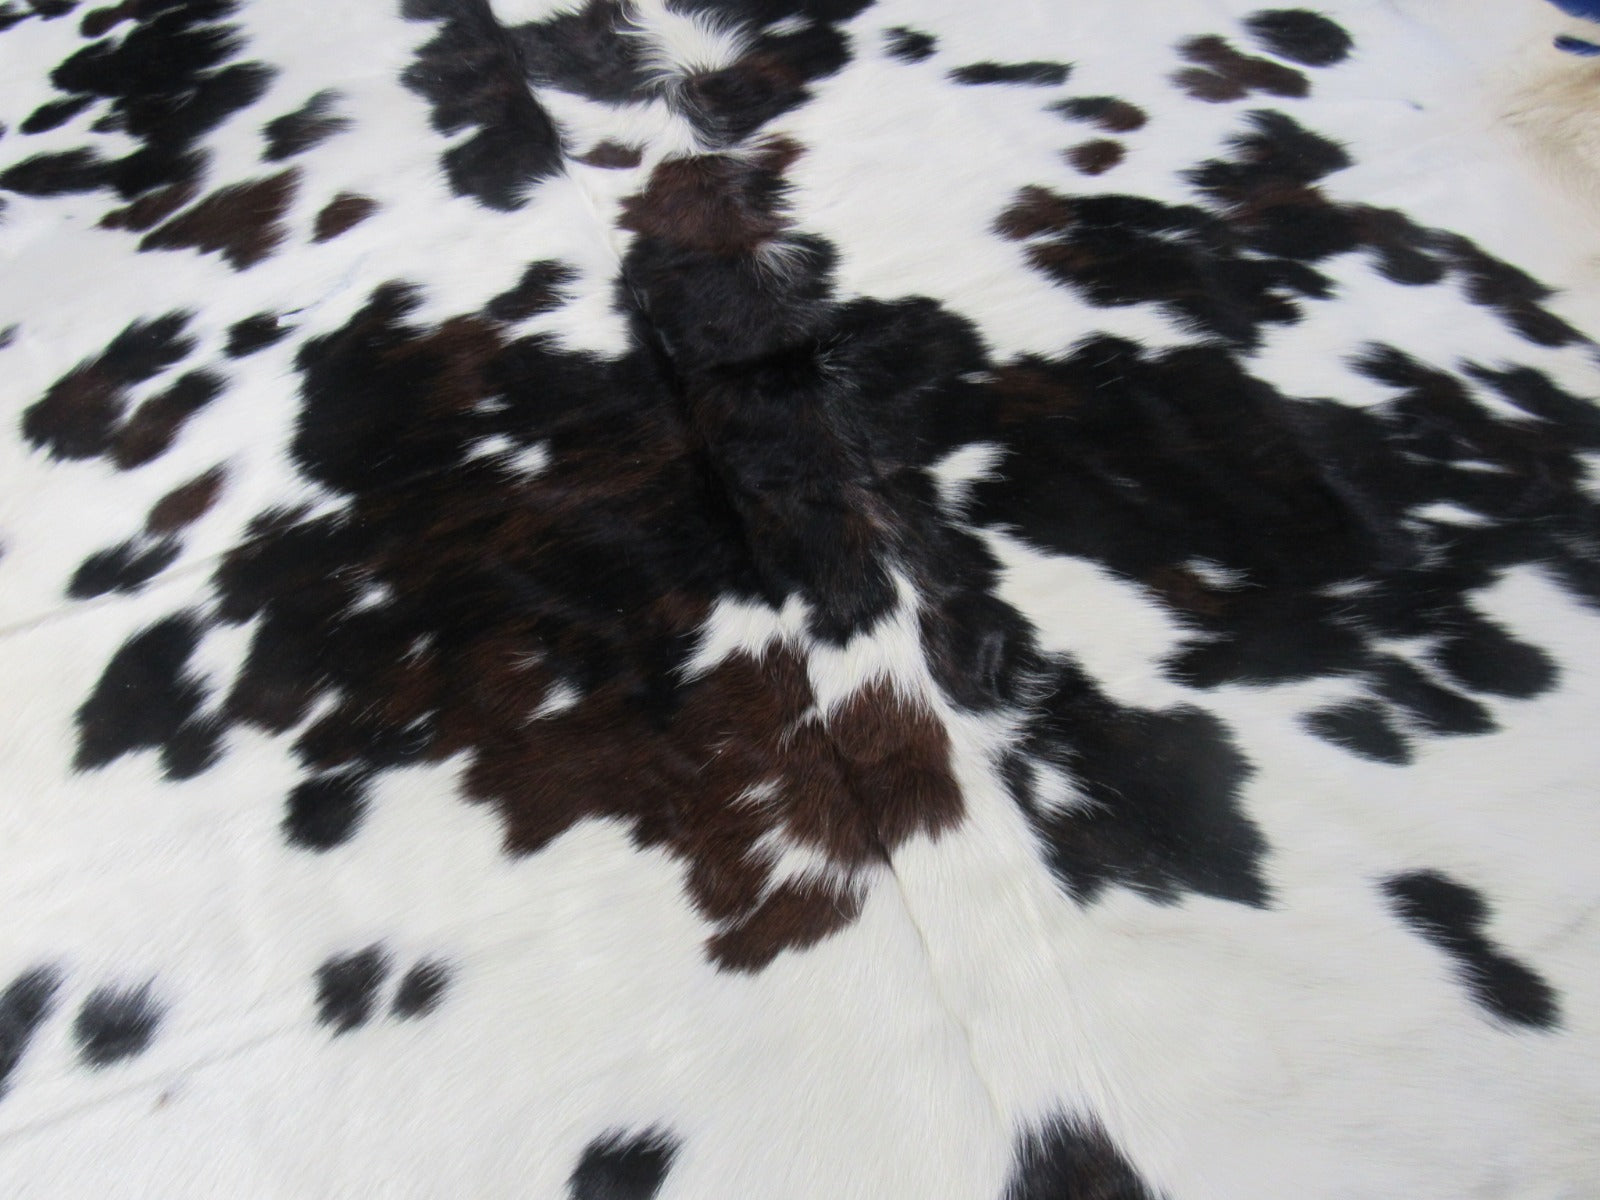 Untrimmed Tricolor Cowhide Rug Size: 8x6.7 feet M-1493